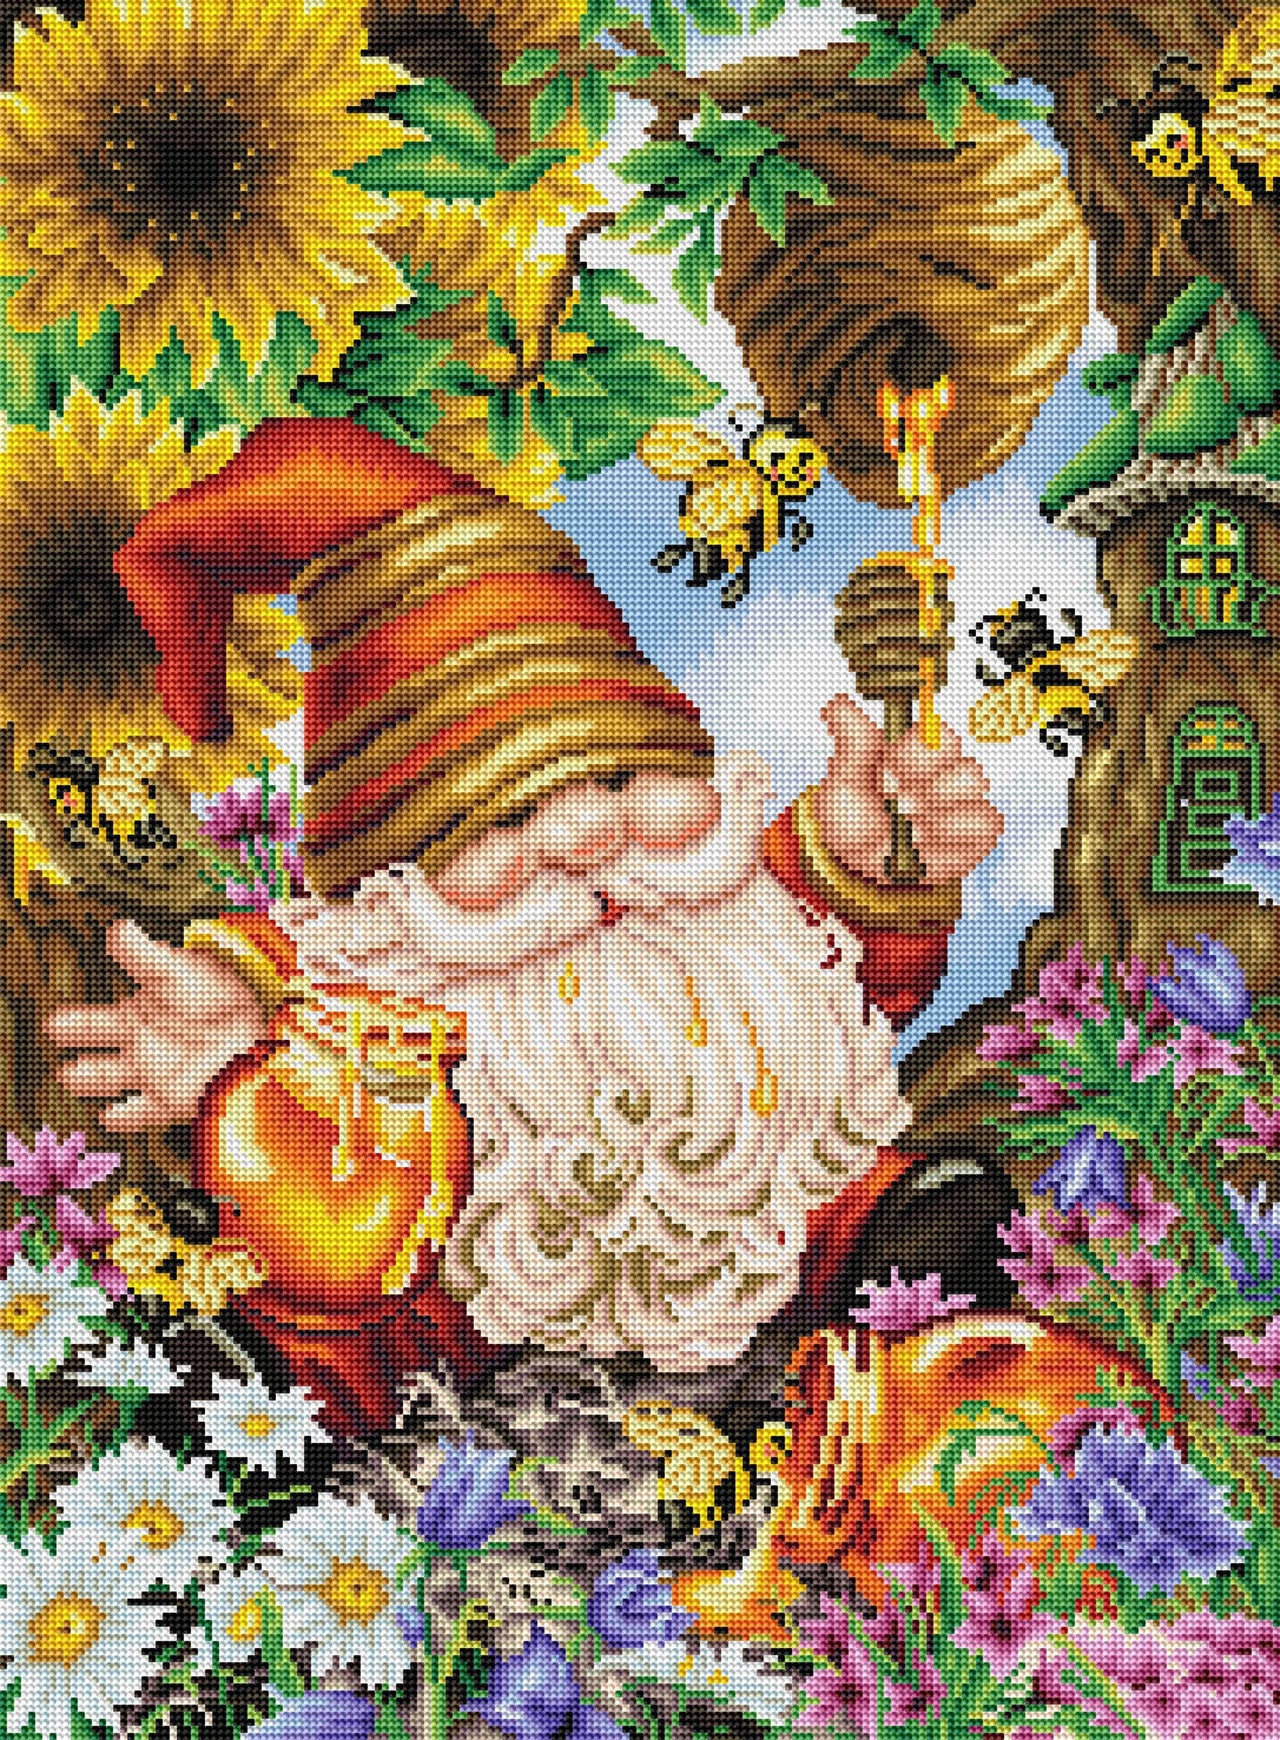 Diamond Painting Honeybee Gnome 20" x 27" (50.7cm x 69cm) / Round with 58 Colors including 4 ABs / 44,526